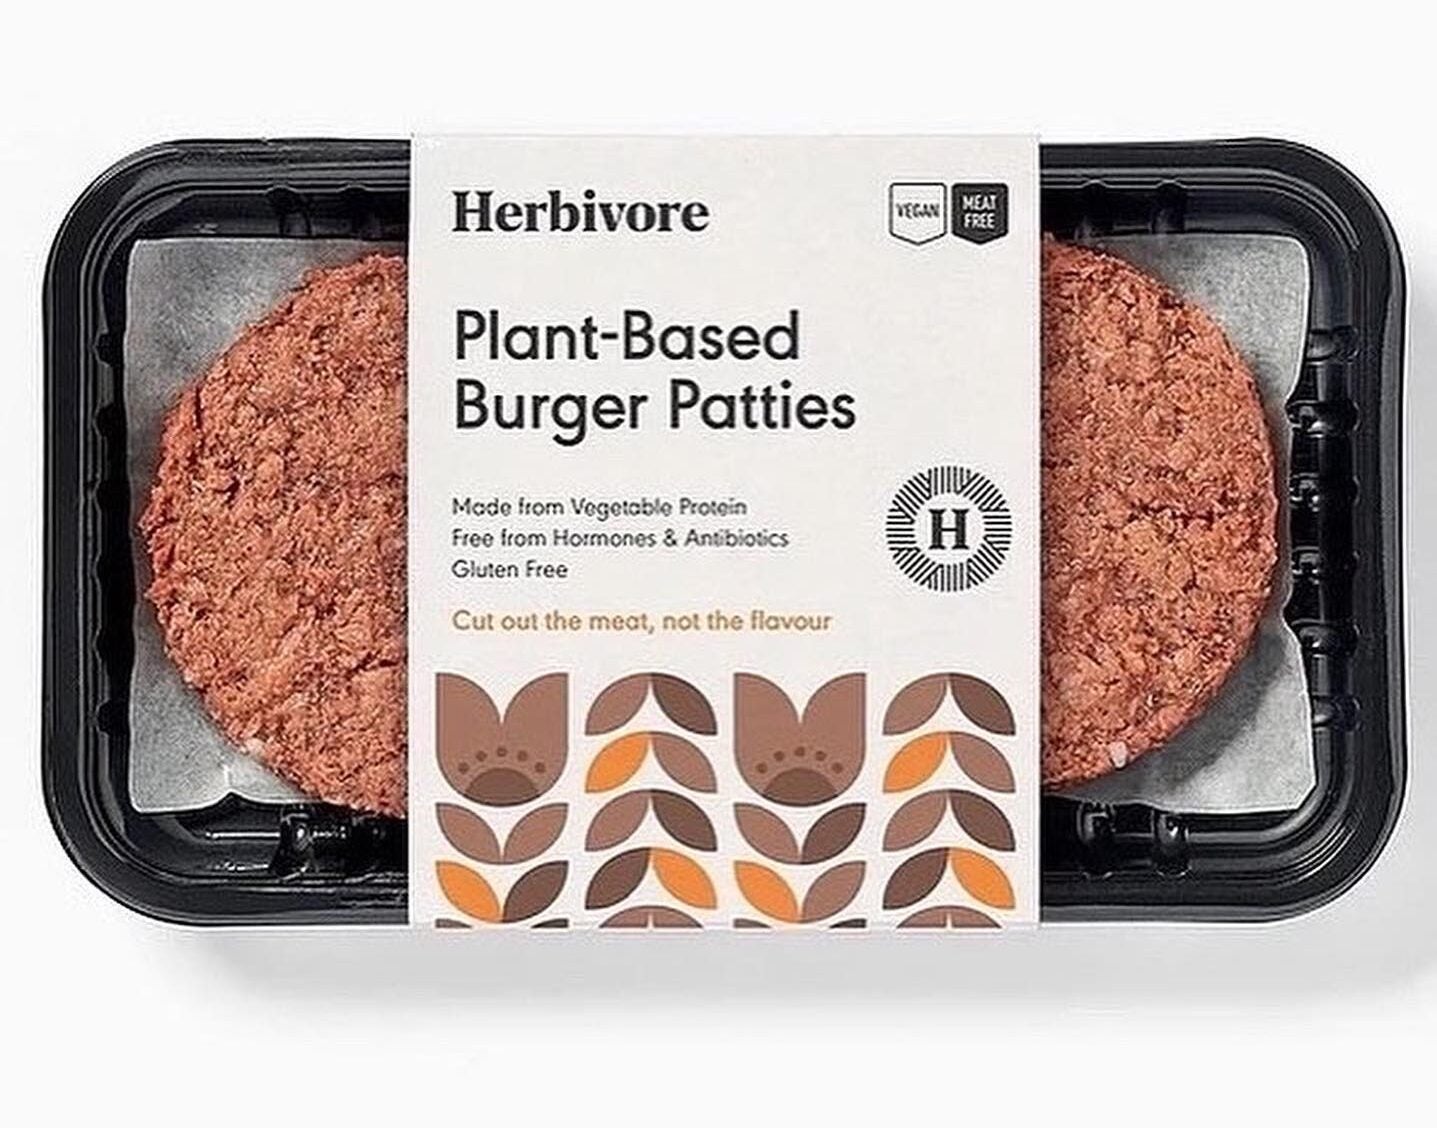 Tiger Brands VC fund makes debut with Herbivore Earthfoods investment